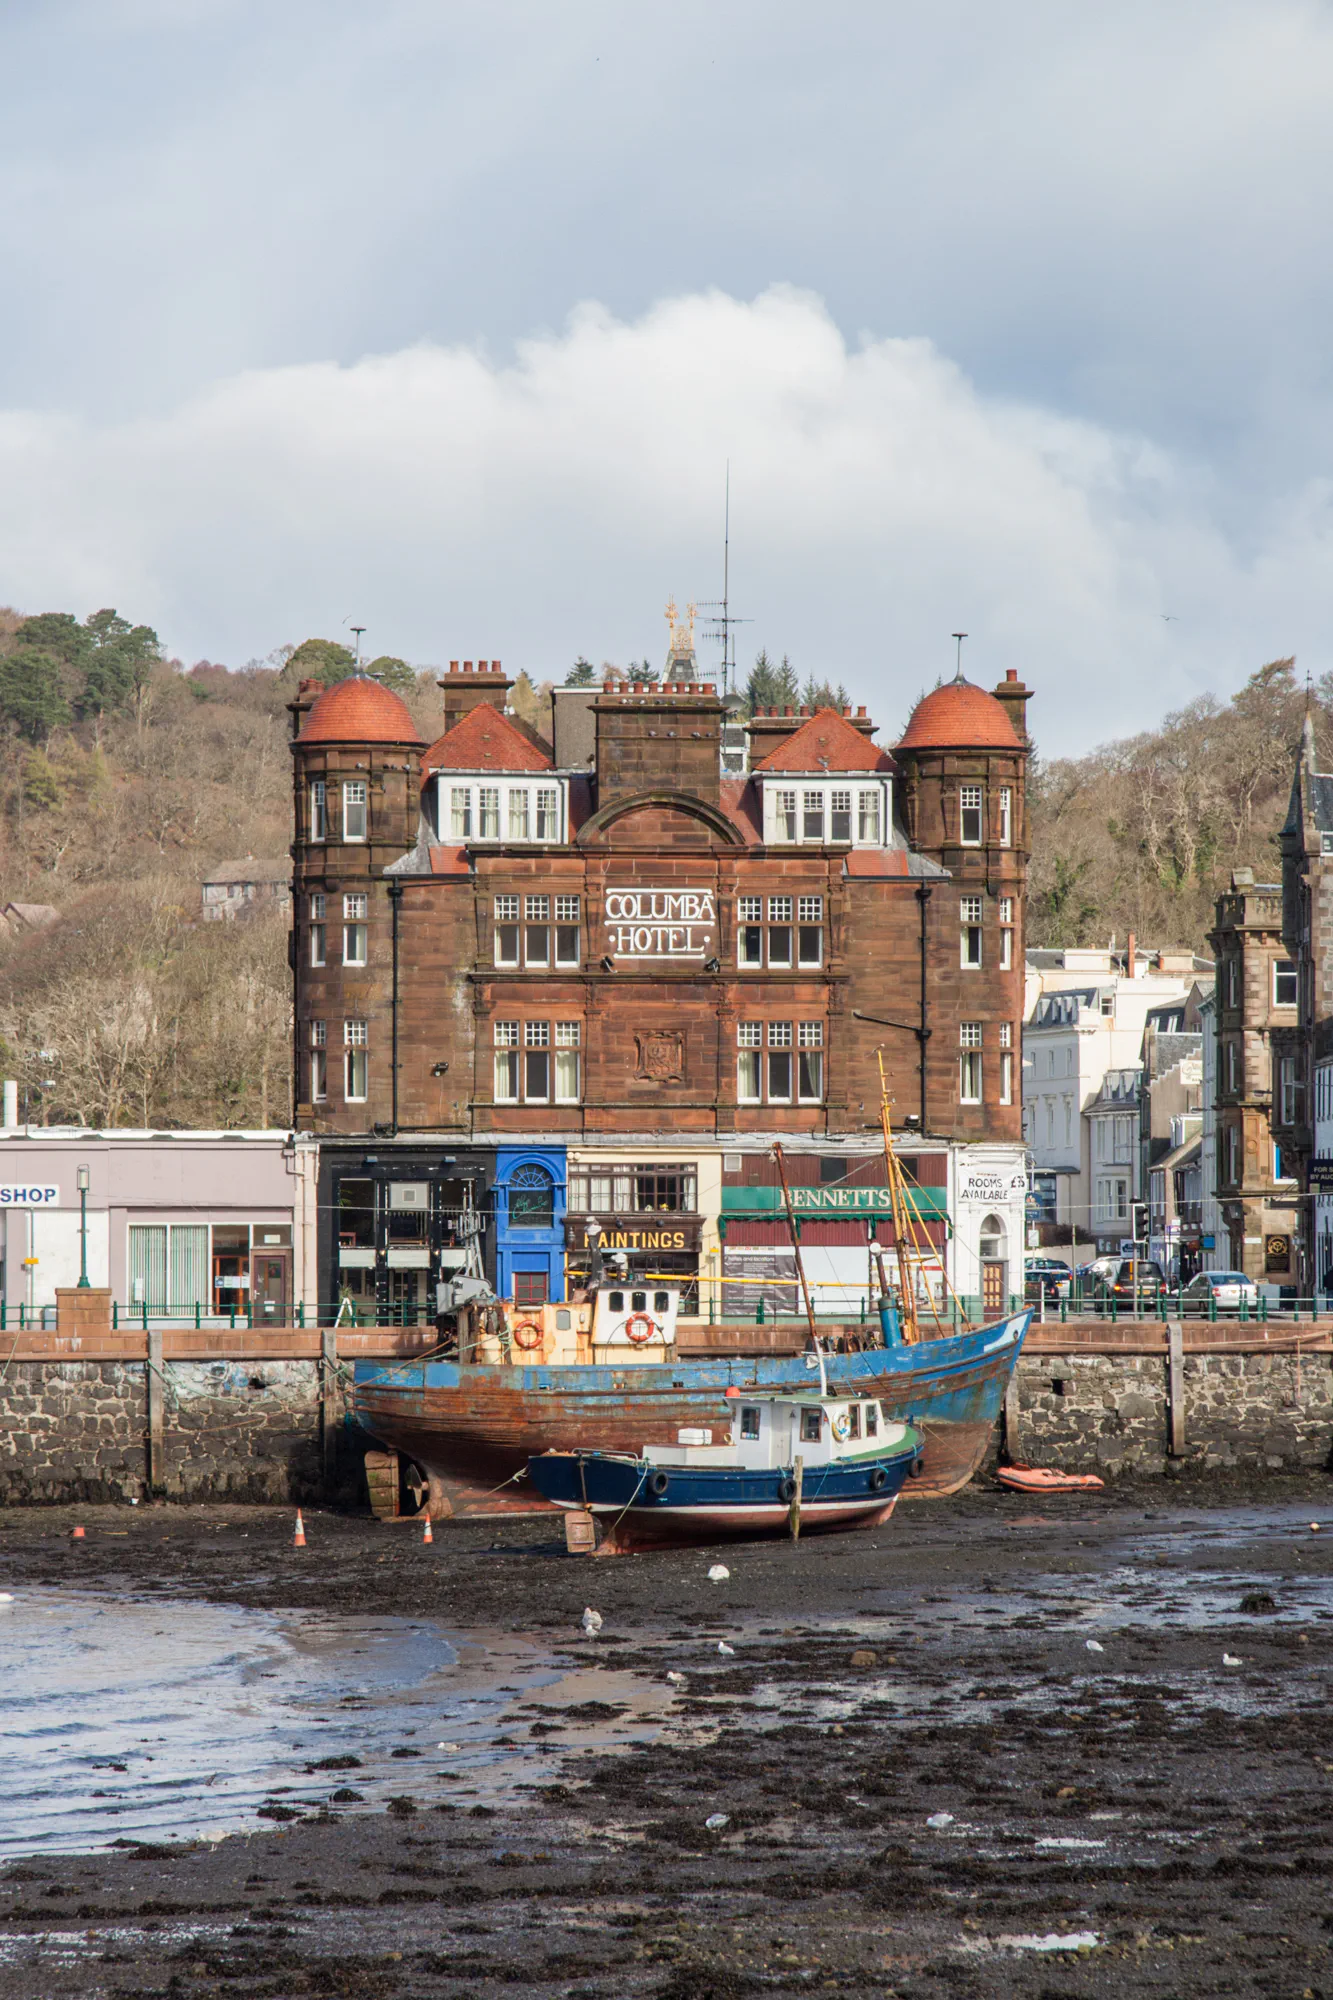 Columba Hotel at Low Tide